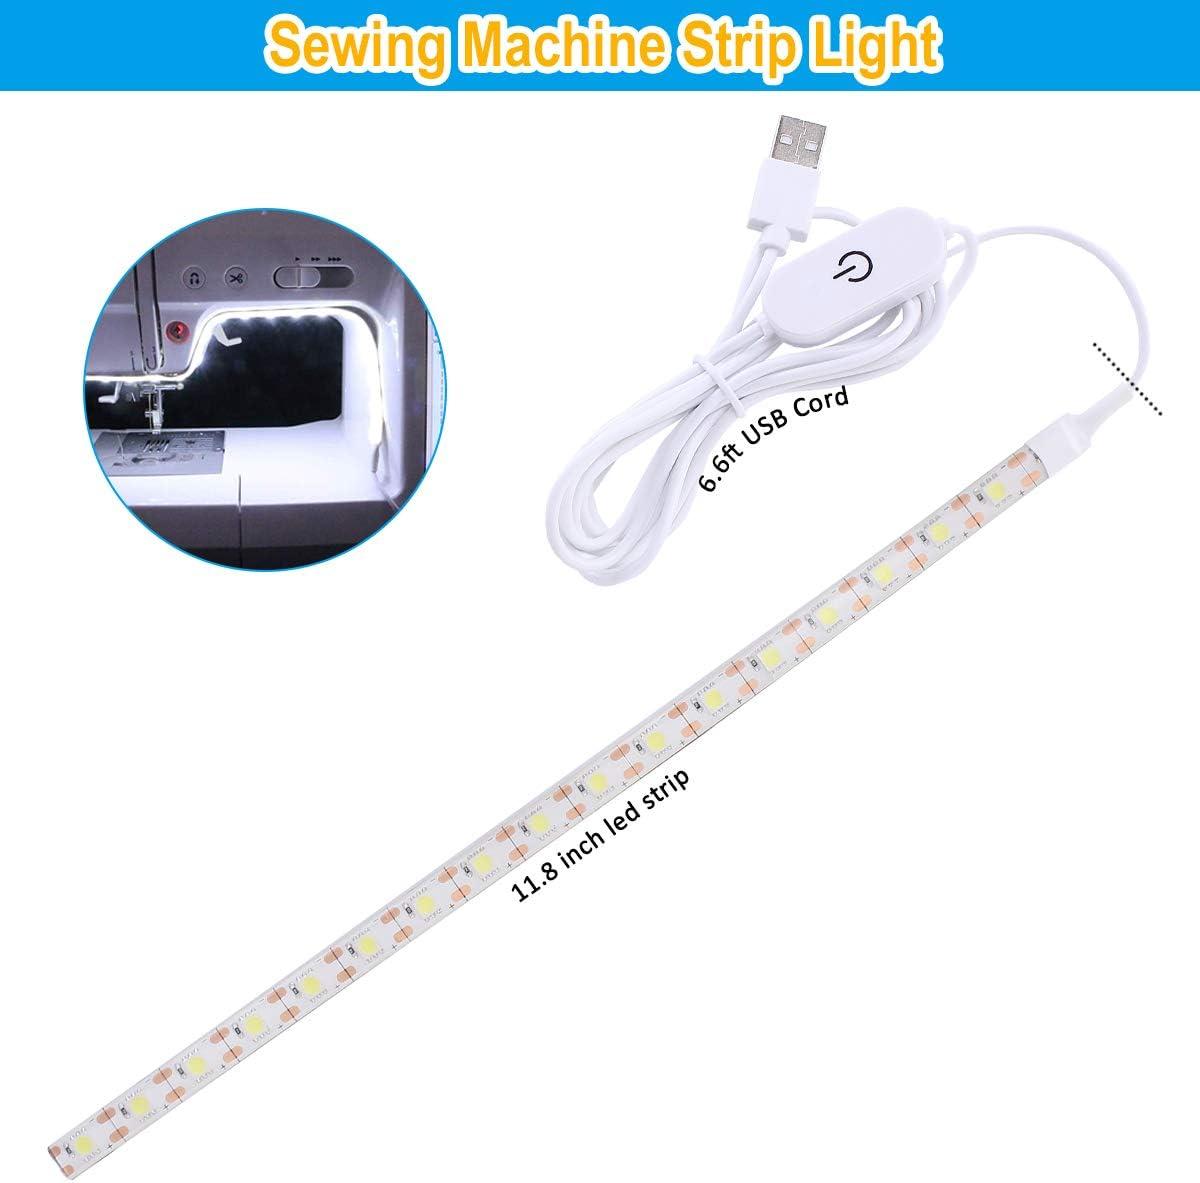 Amazing power Sewing Machine Light Bright Sewing Strip Light with